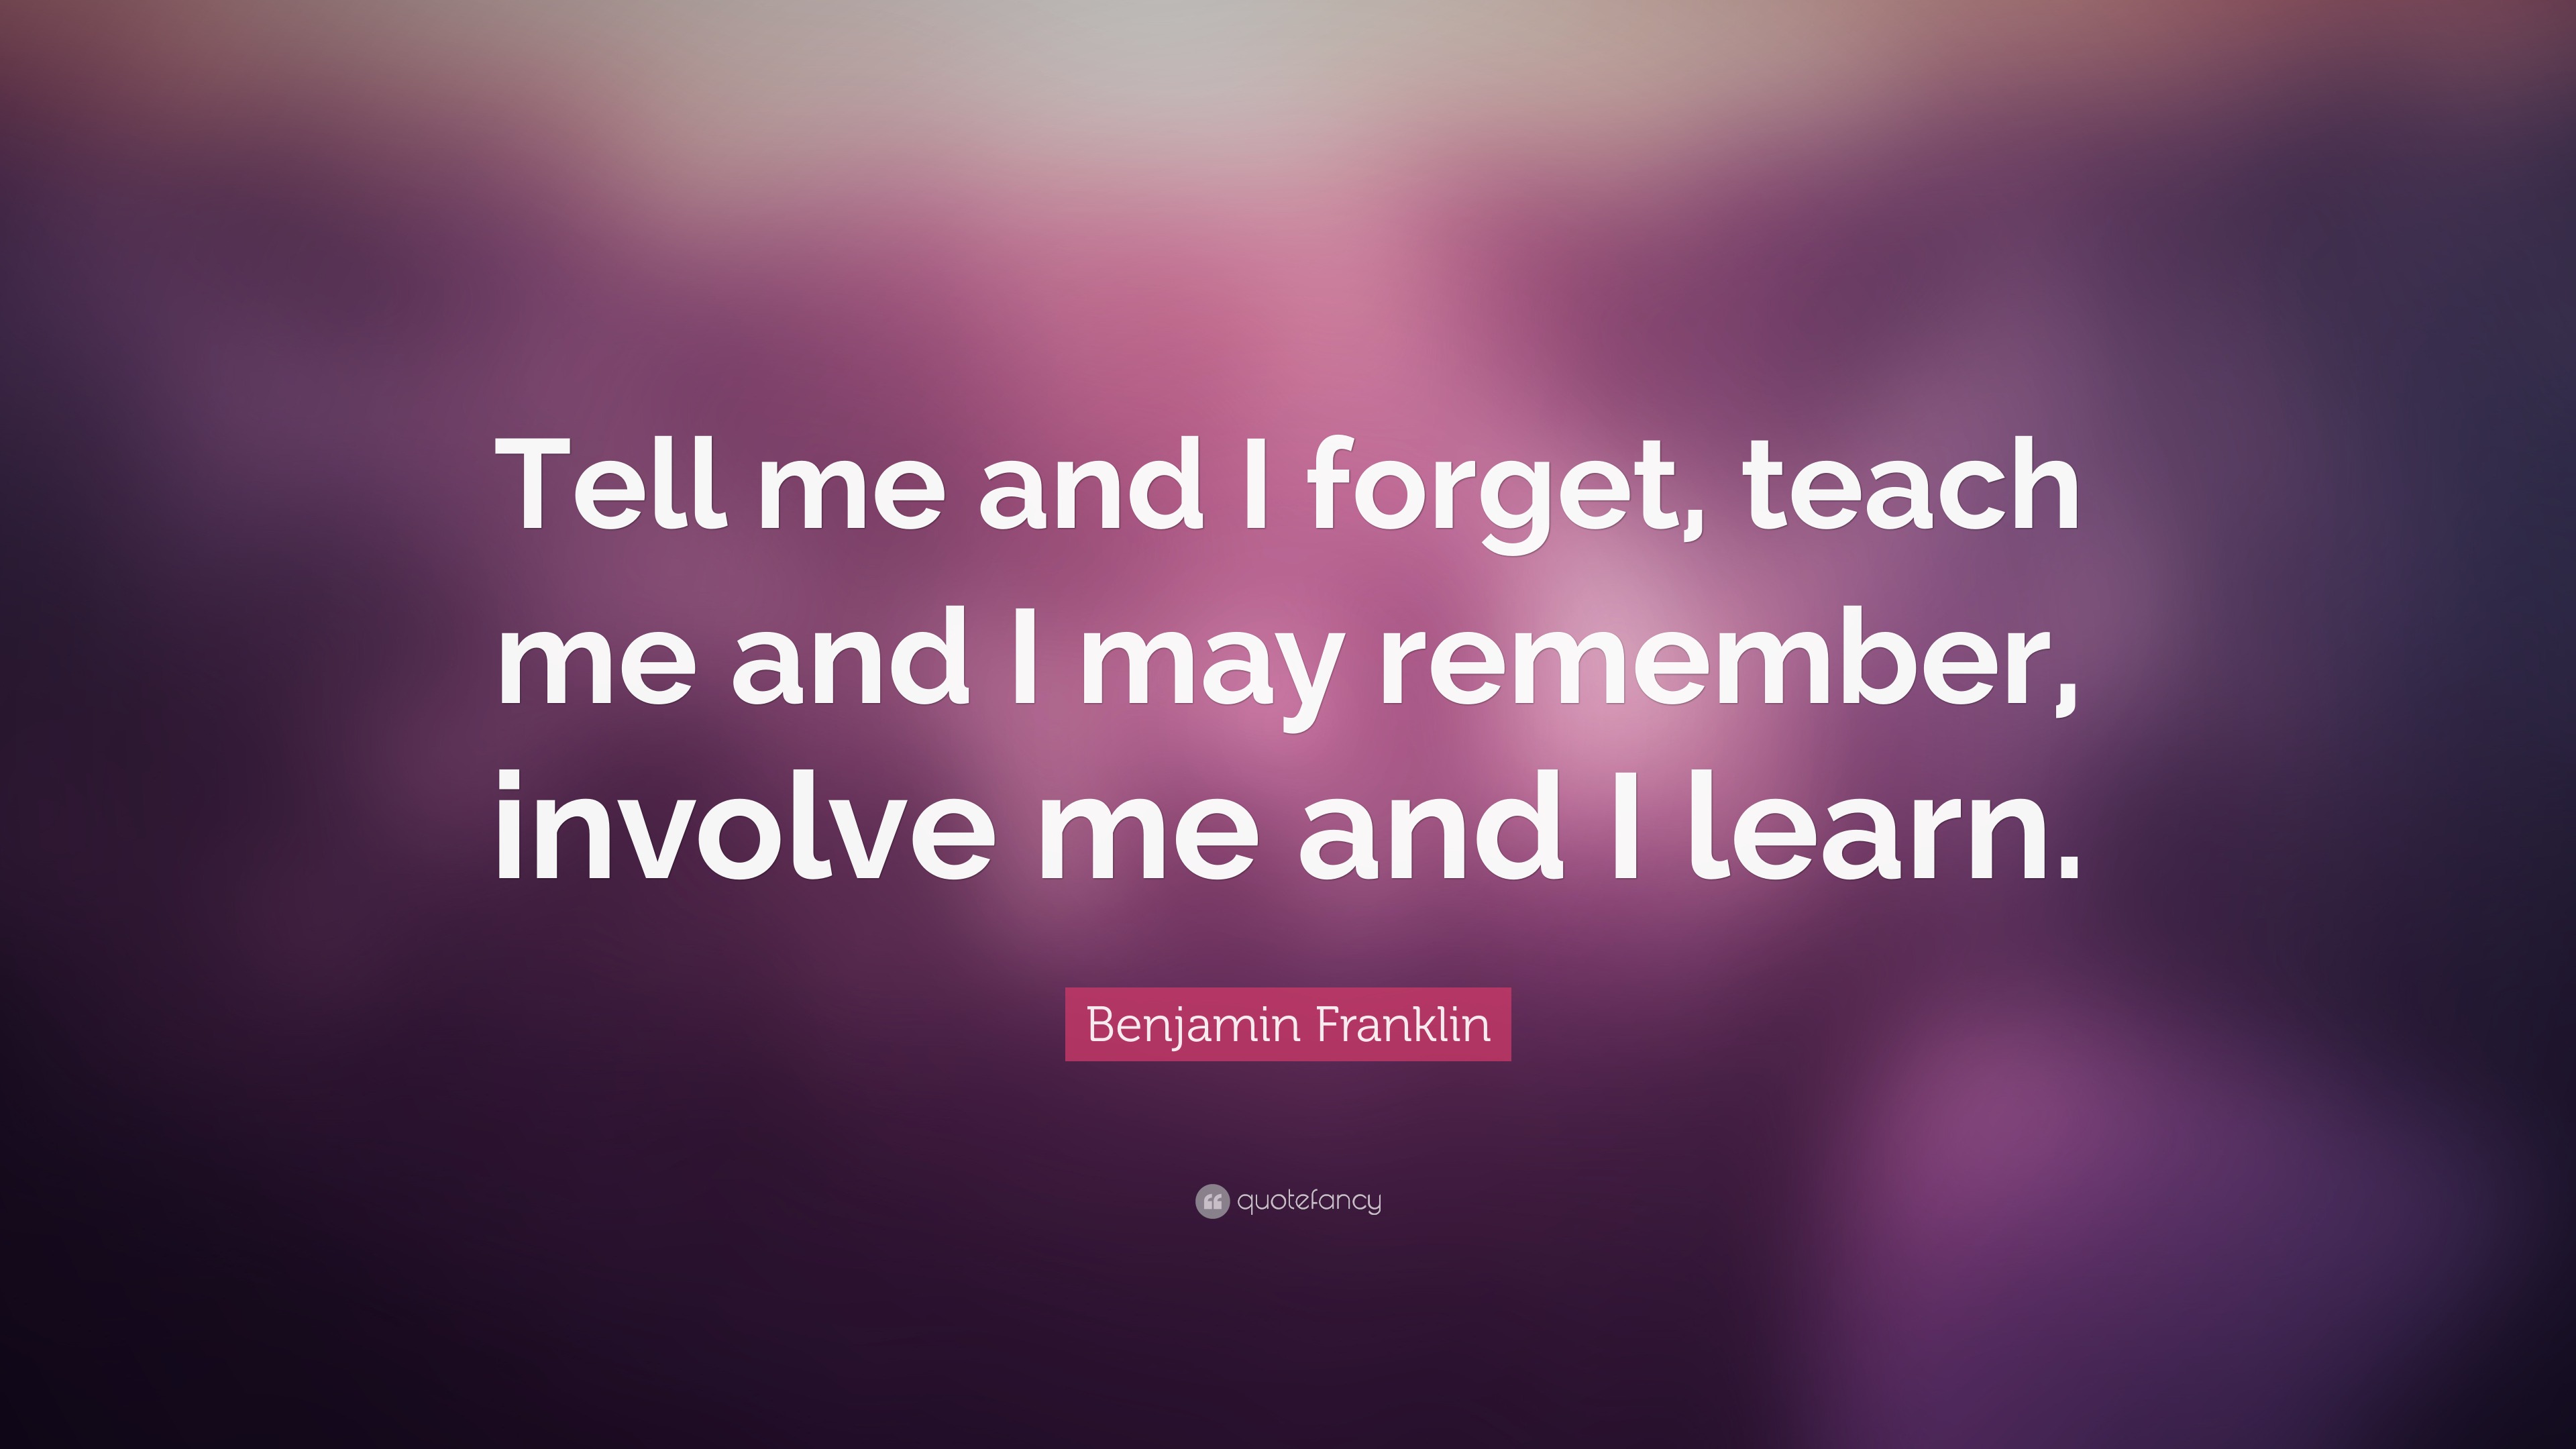 Benjamin Franklin Quote: “Tell me and I forget, teach me and I may